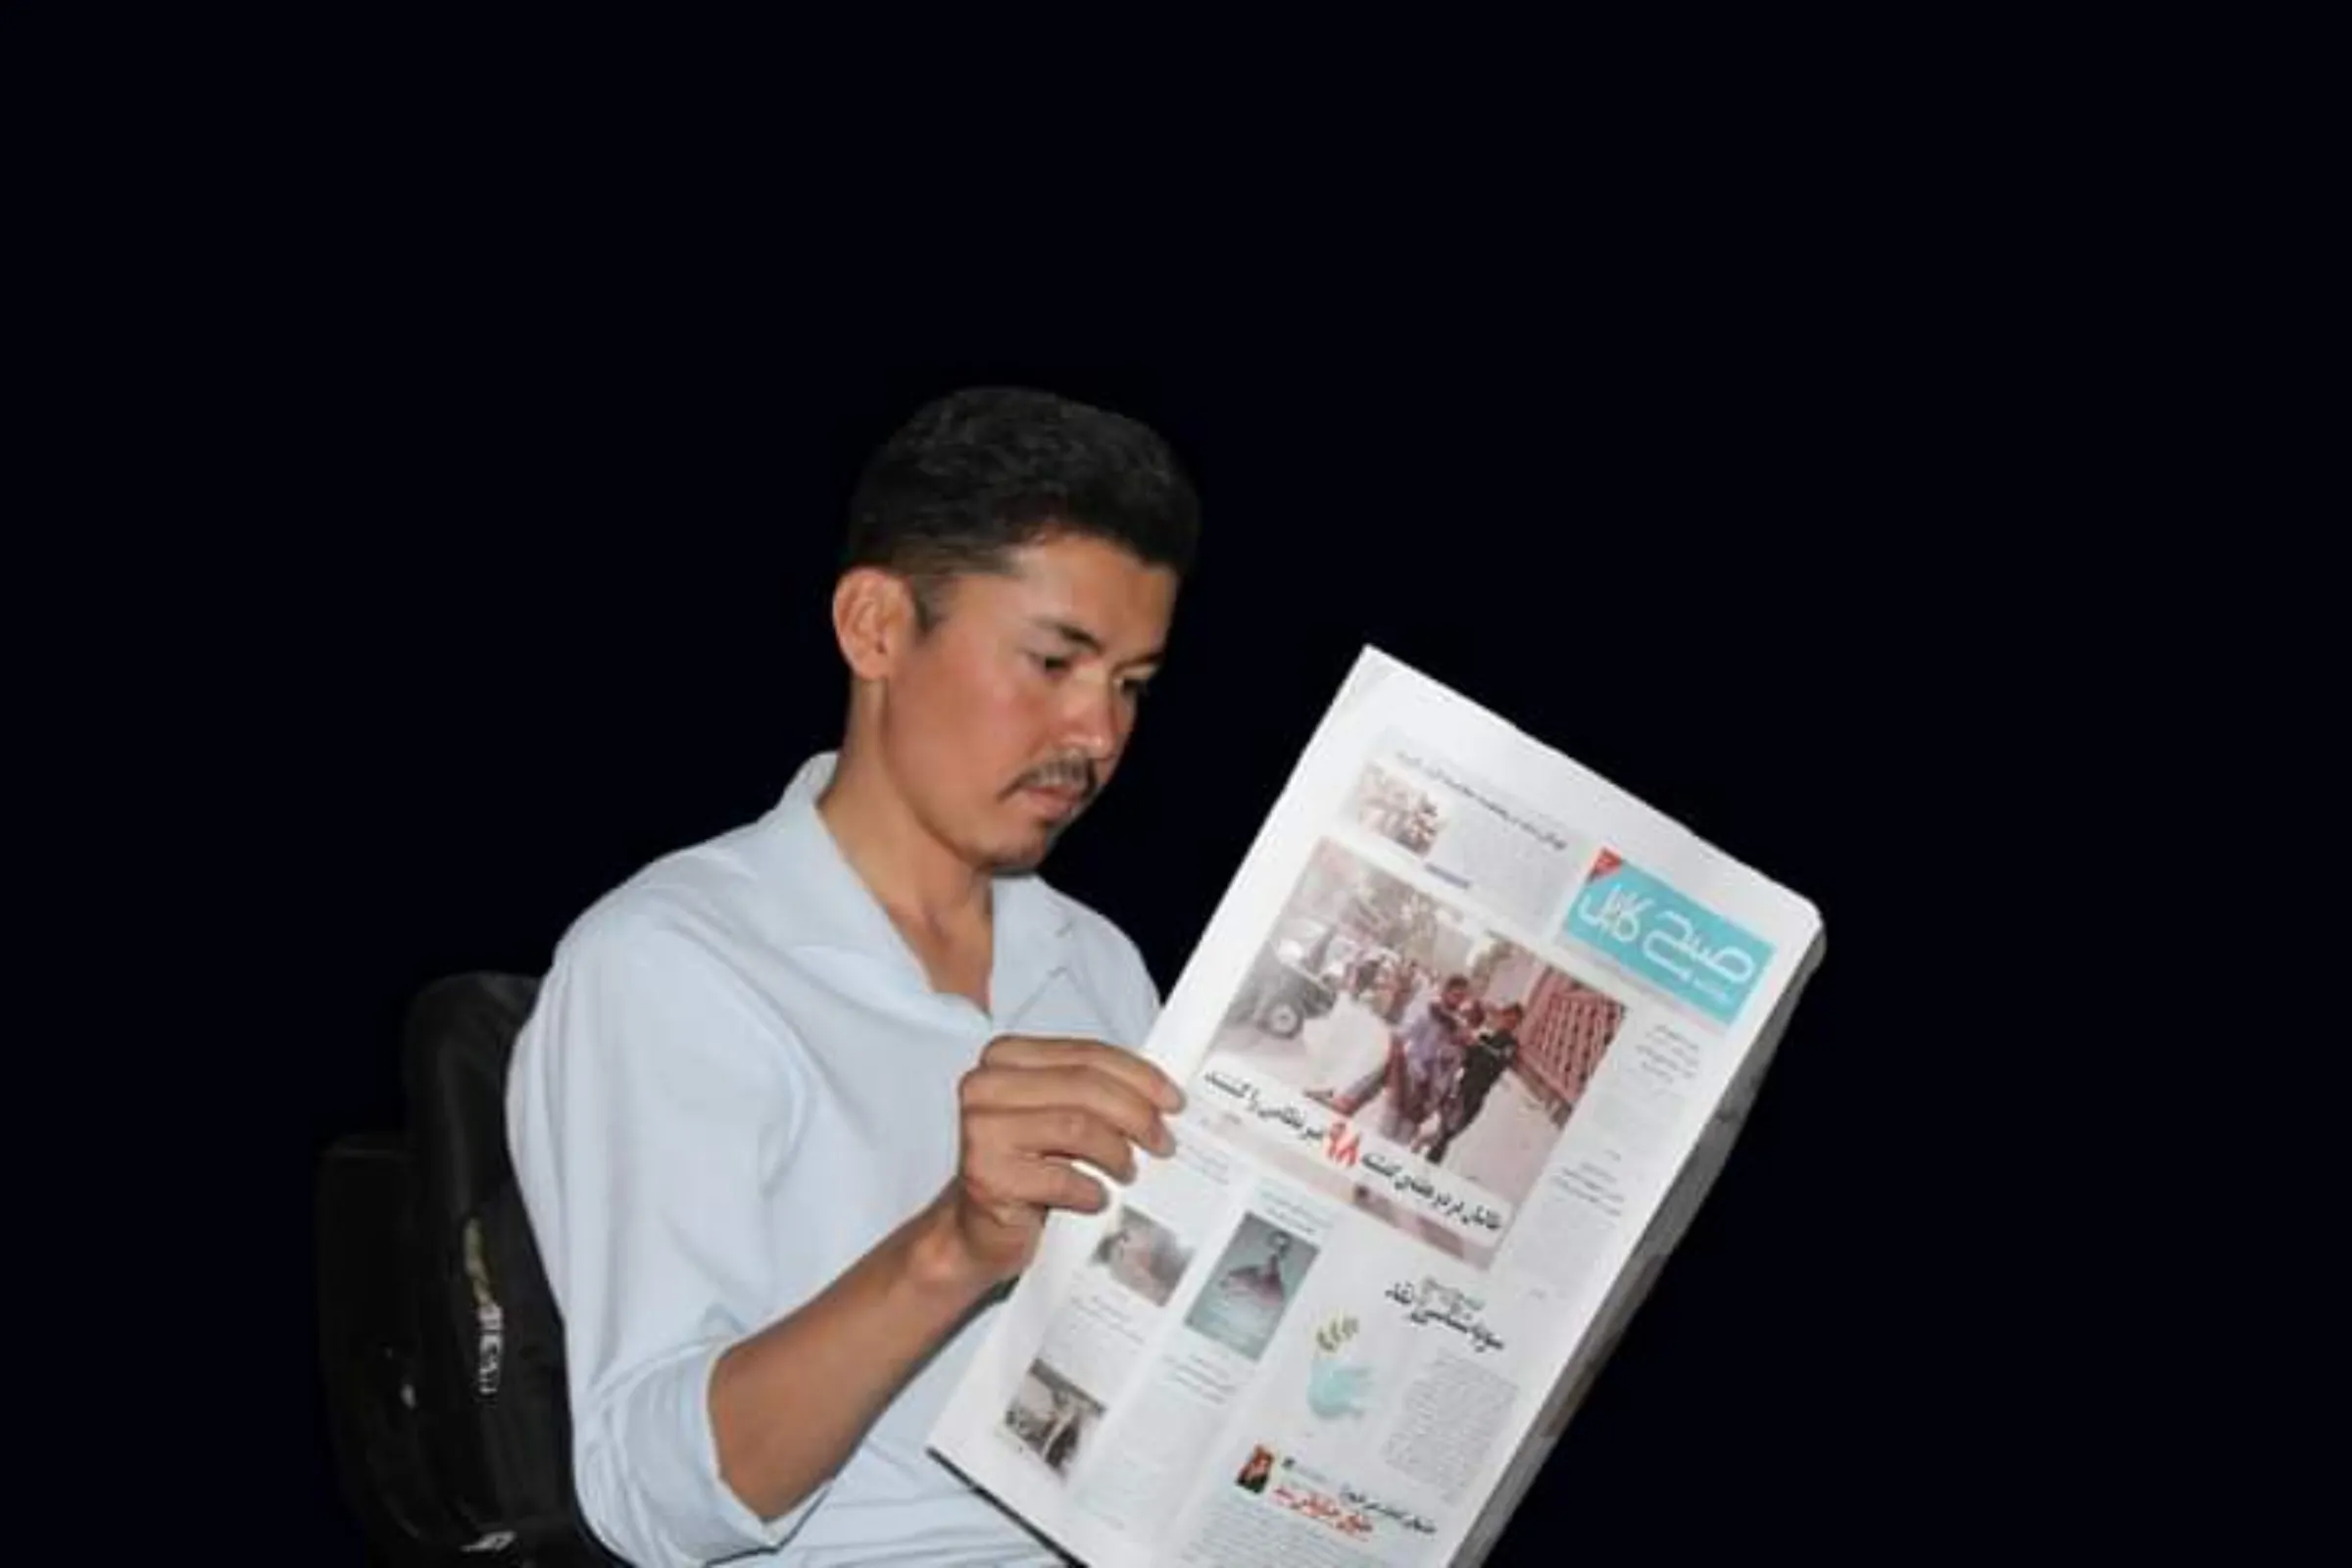 Afghan journalist Ismail Lali is seen in Kabul holding a newspaper in the dark